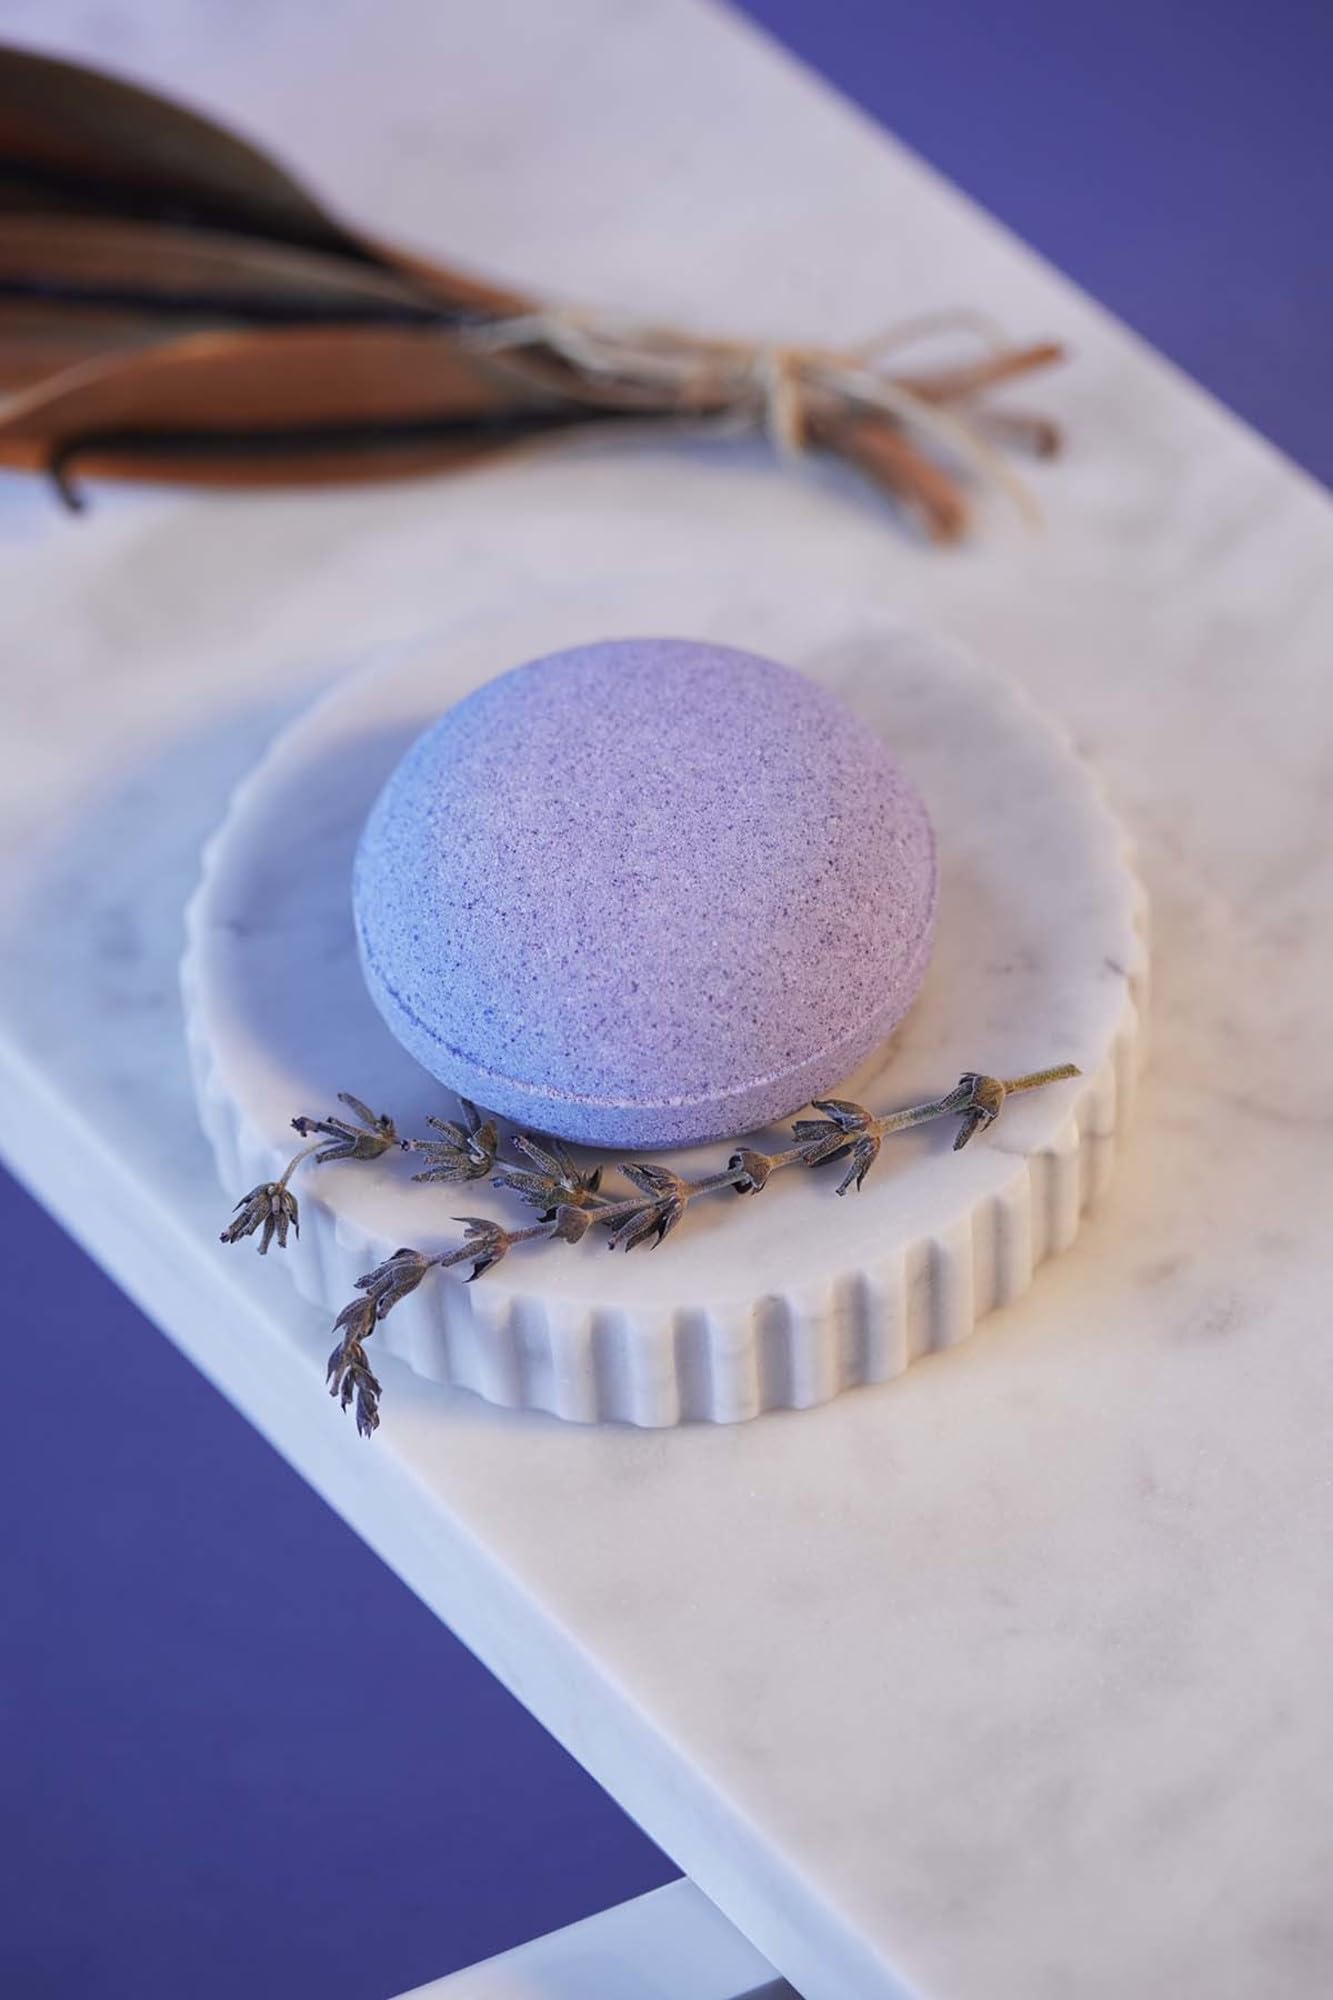 Sprig by Kohler Lavender + Vanilla Bath Bomb, Hypoallergenic, Made with Natural Botanicals & Premium Skincare Ingredients (Shea Butter, Coconut Oil, & Kaolin Clay) to Relax and Calm - Sleep